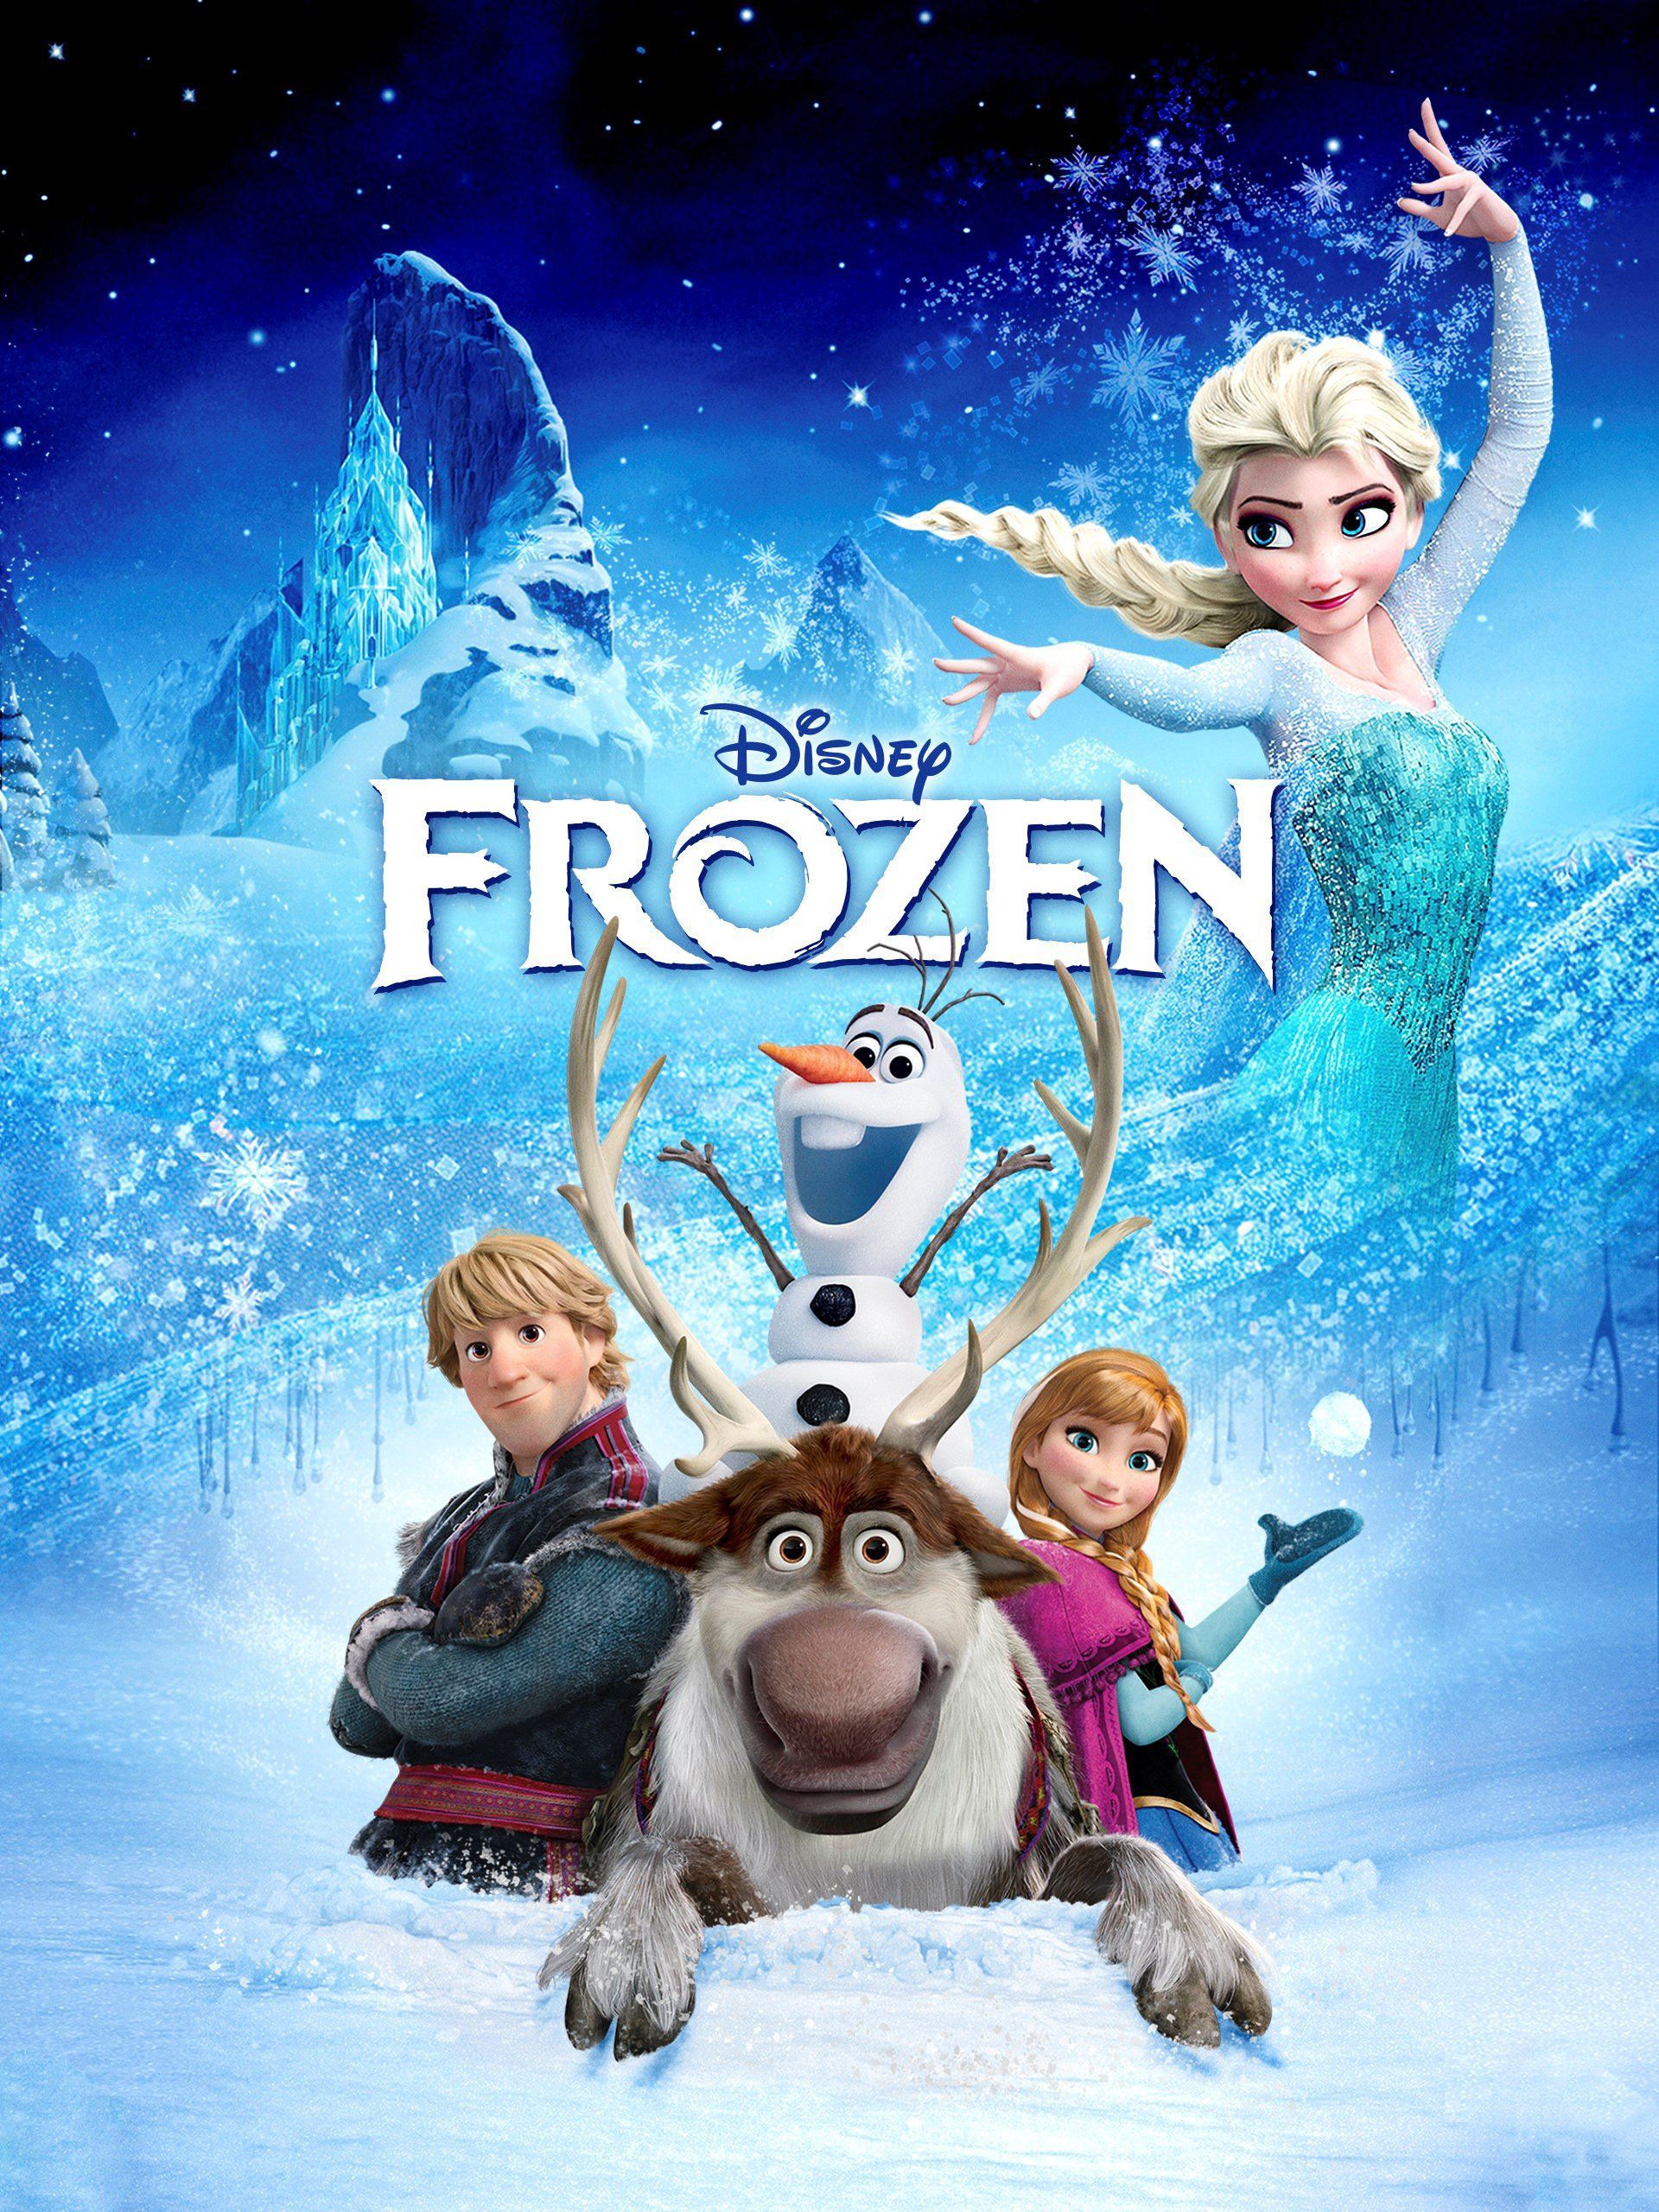 1534268898 christmas movies for kids frozen 1534268875